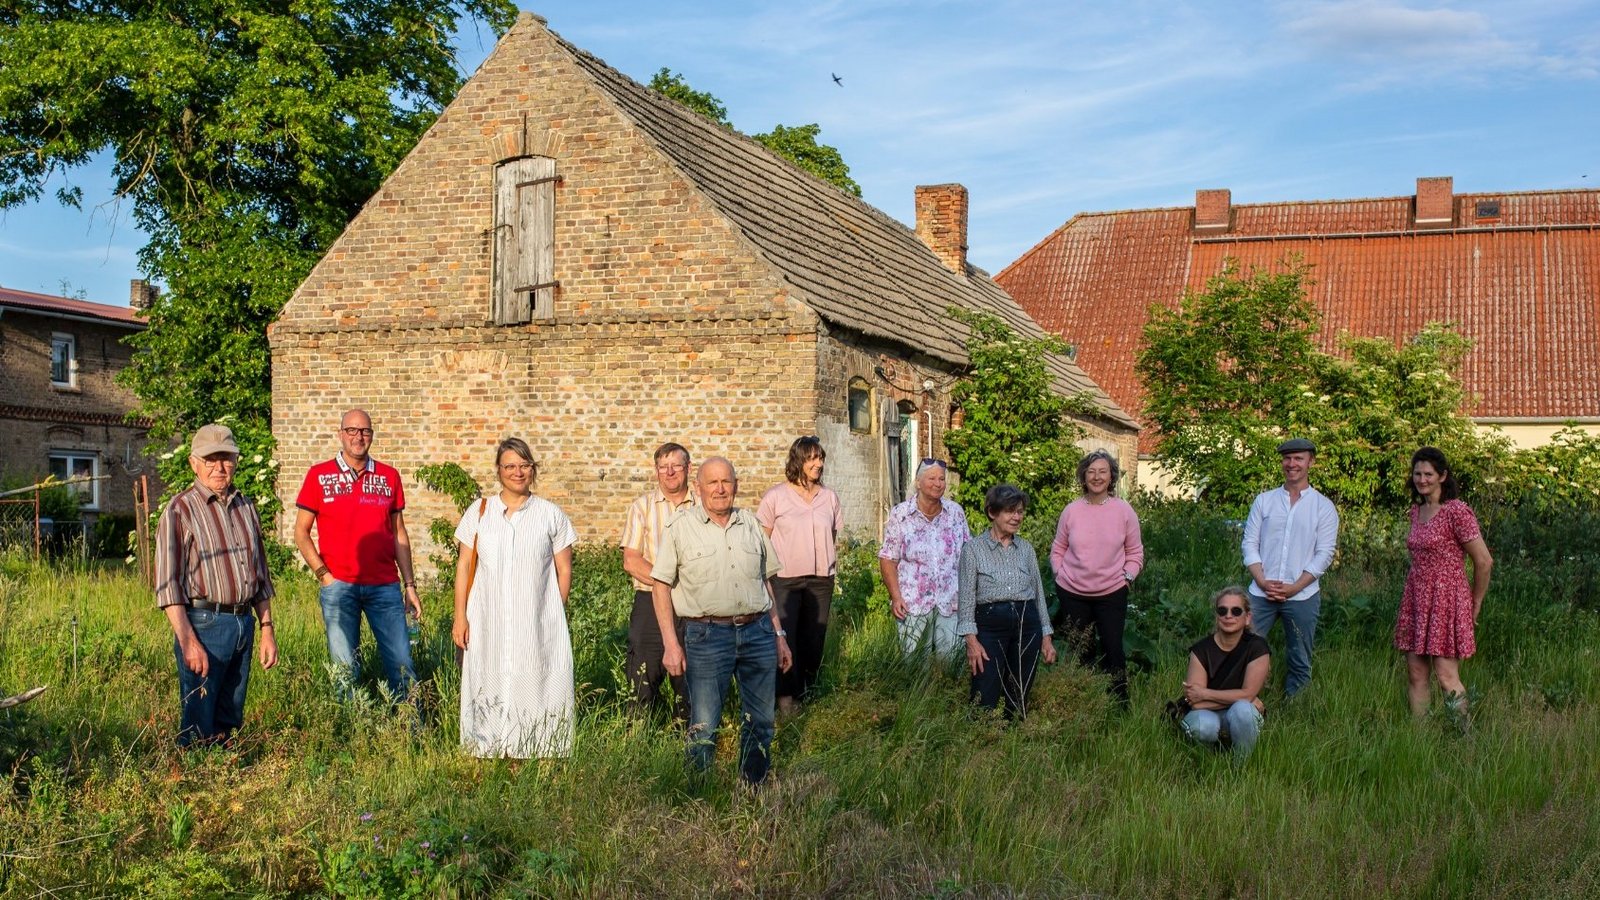 Group photo of The New Patrons of Wietstock in front of an old building in the village